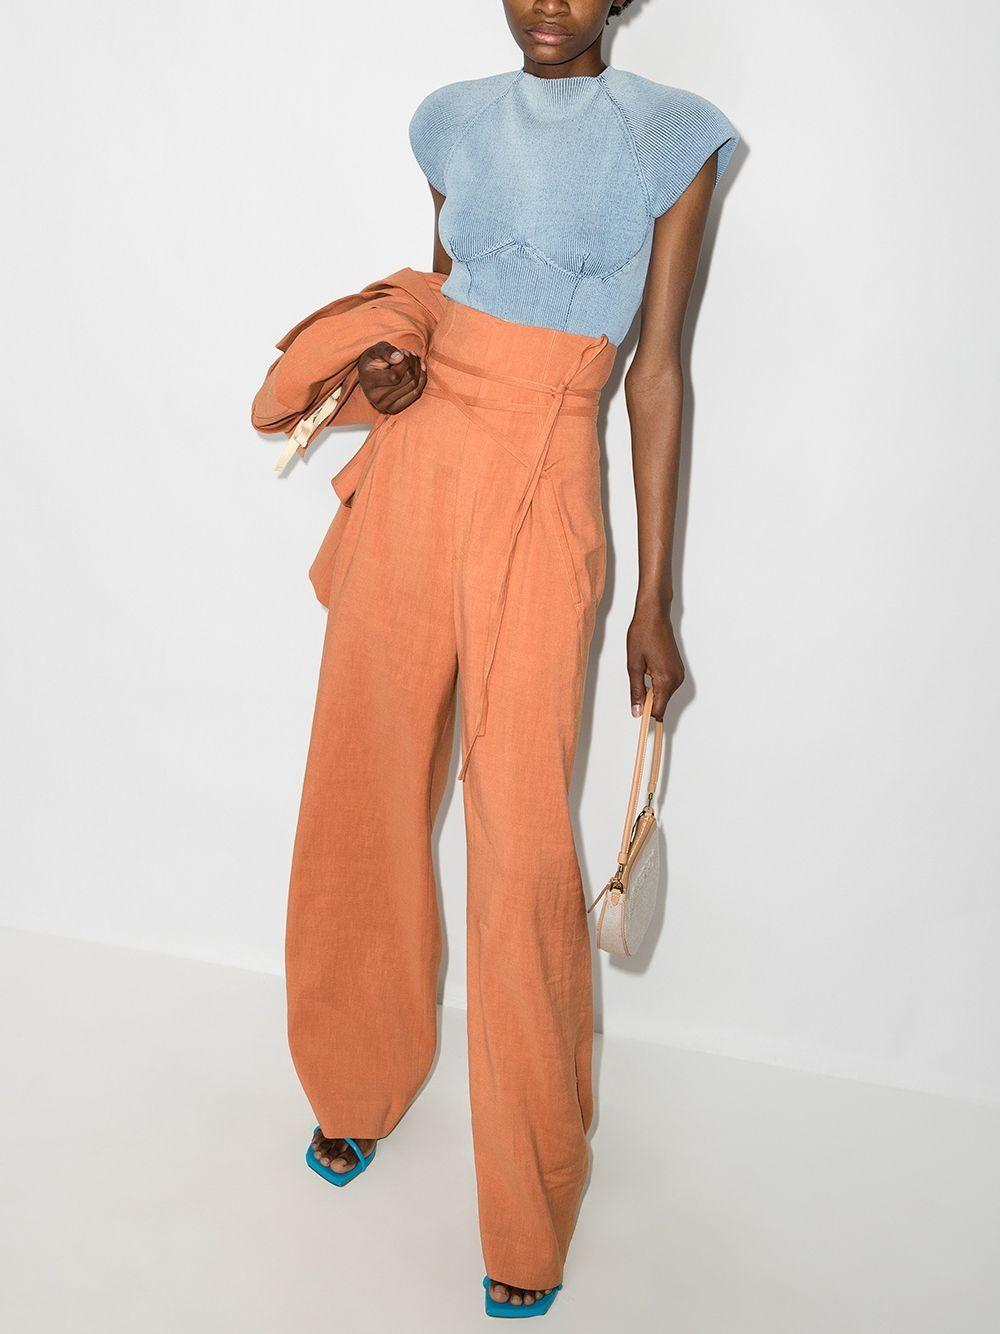 Jacquemus Novio High-waisted Trousers in Orange | Lyst Canada